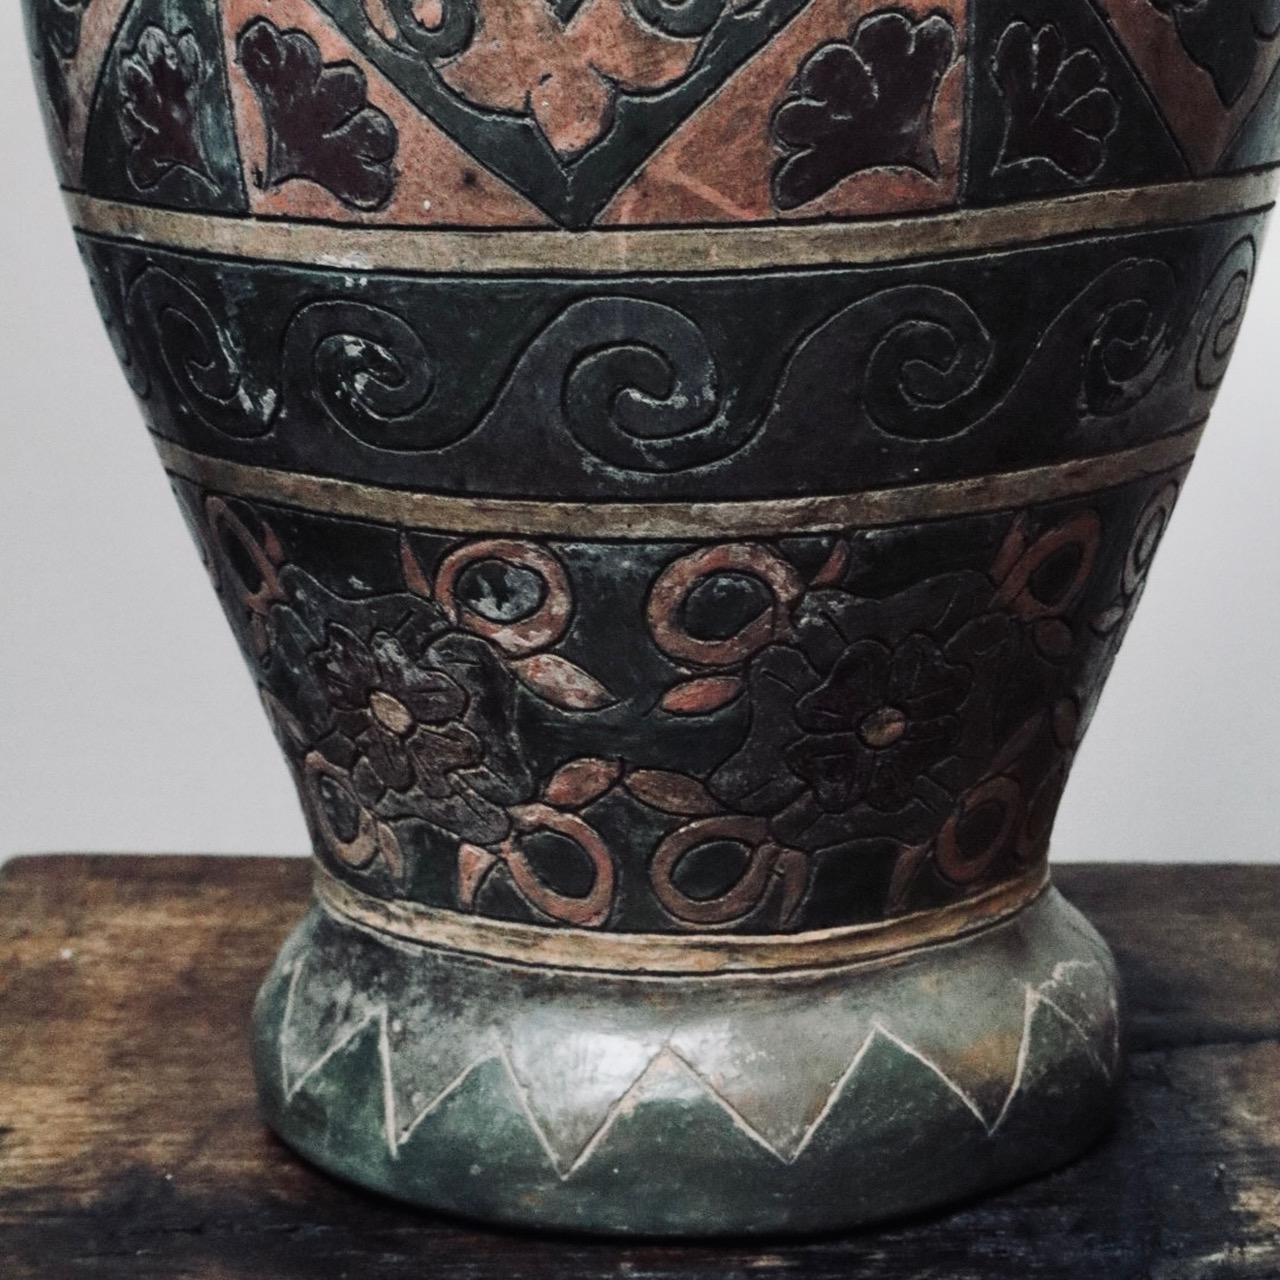 Mexican Floral Decorative Terra-Cotta Vessel from Mexico